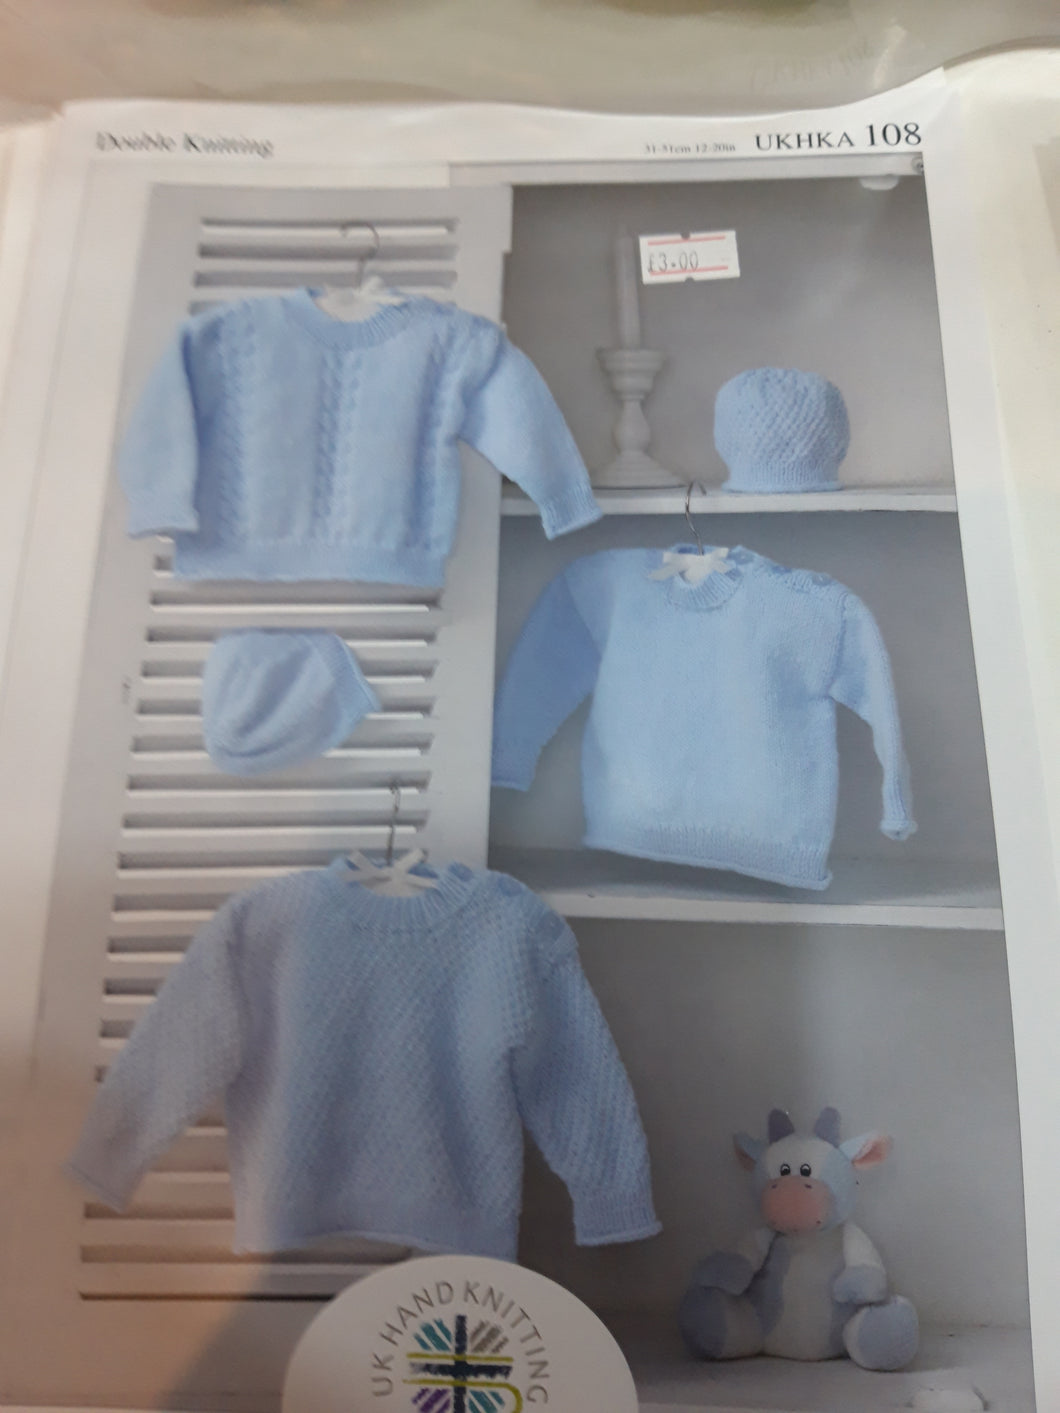 UKHKA 108 - Baby Double Knit - Jumpers and Hat - 12